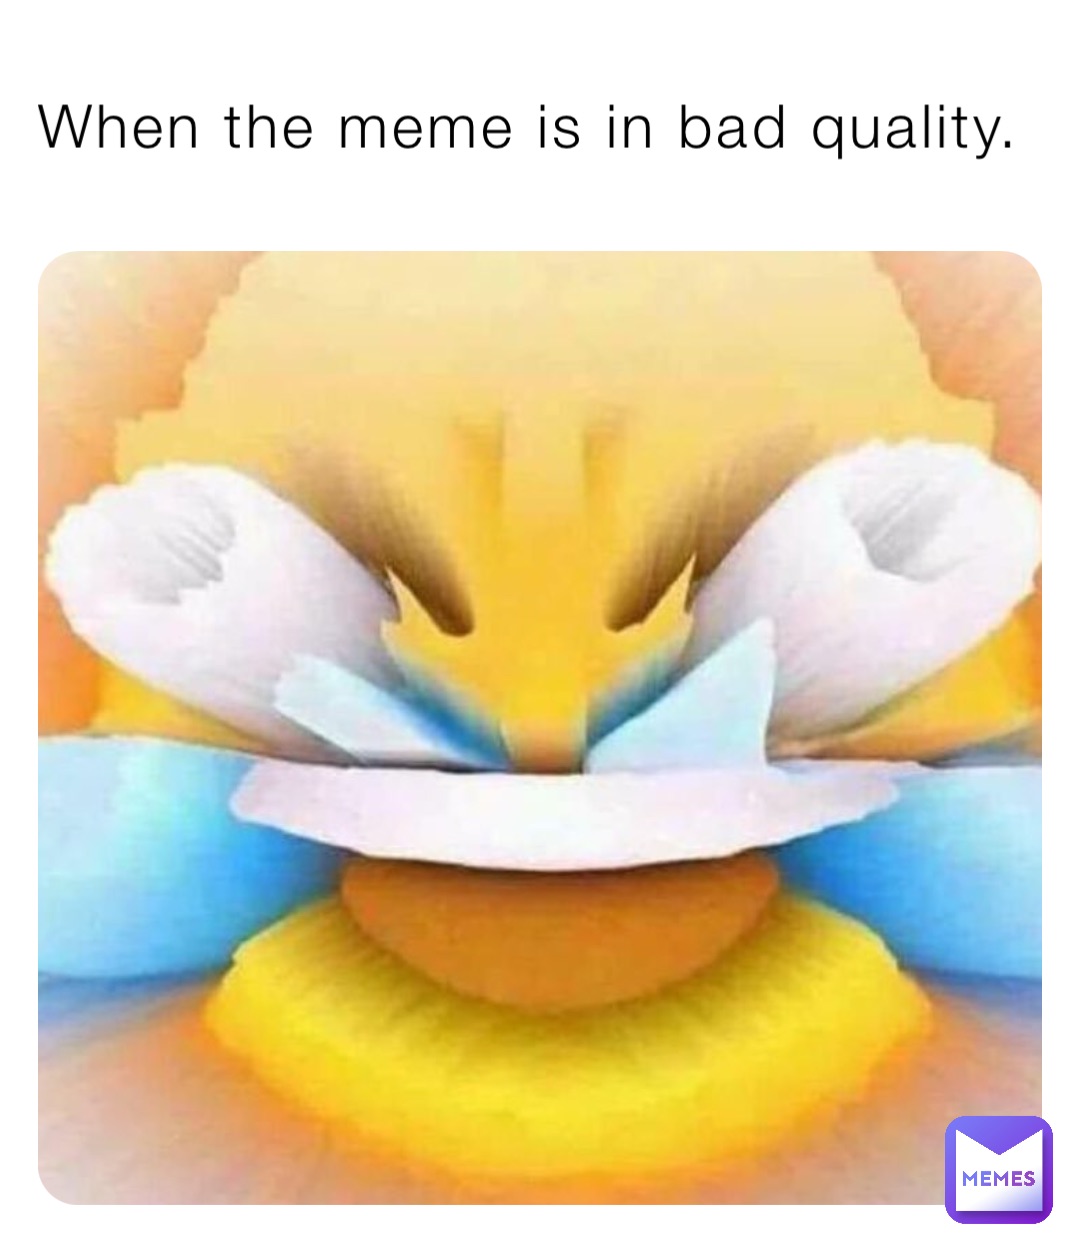 When the meme is in bad quality.